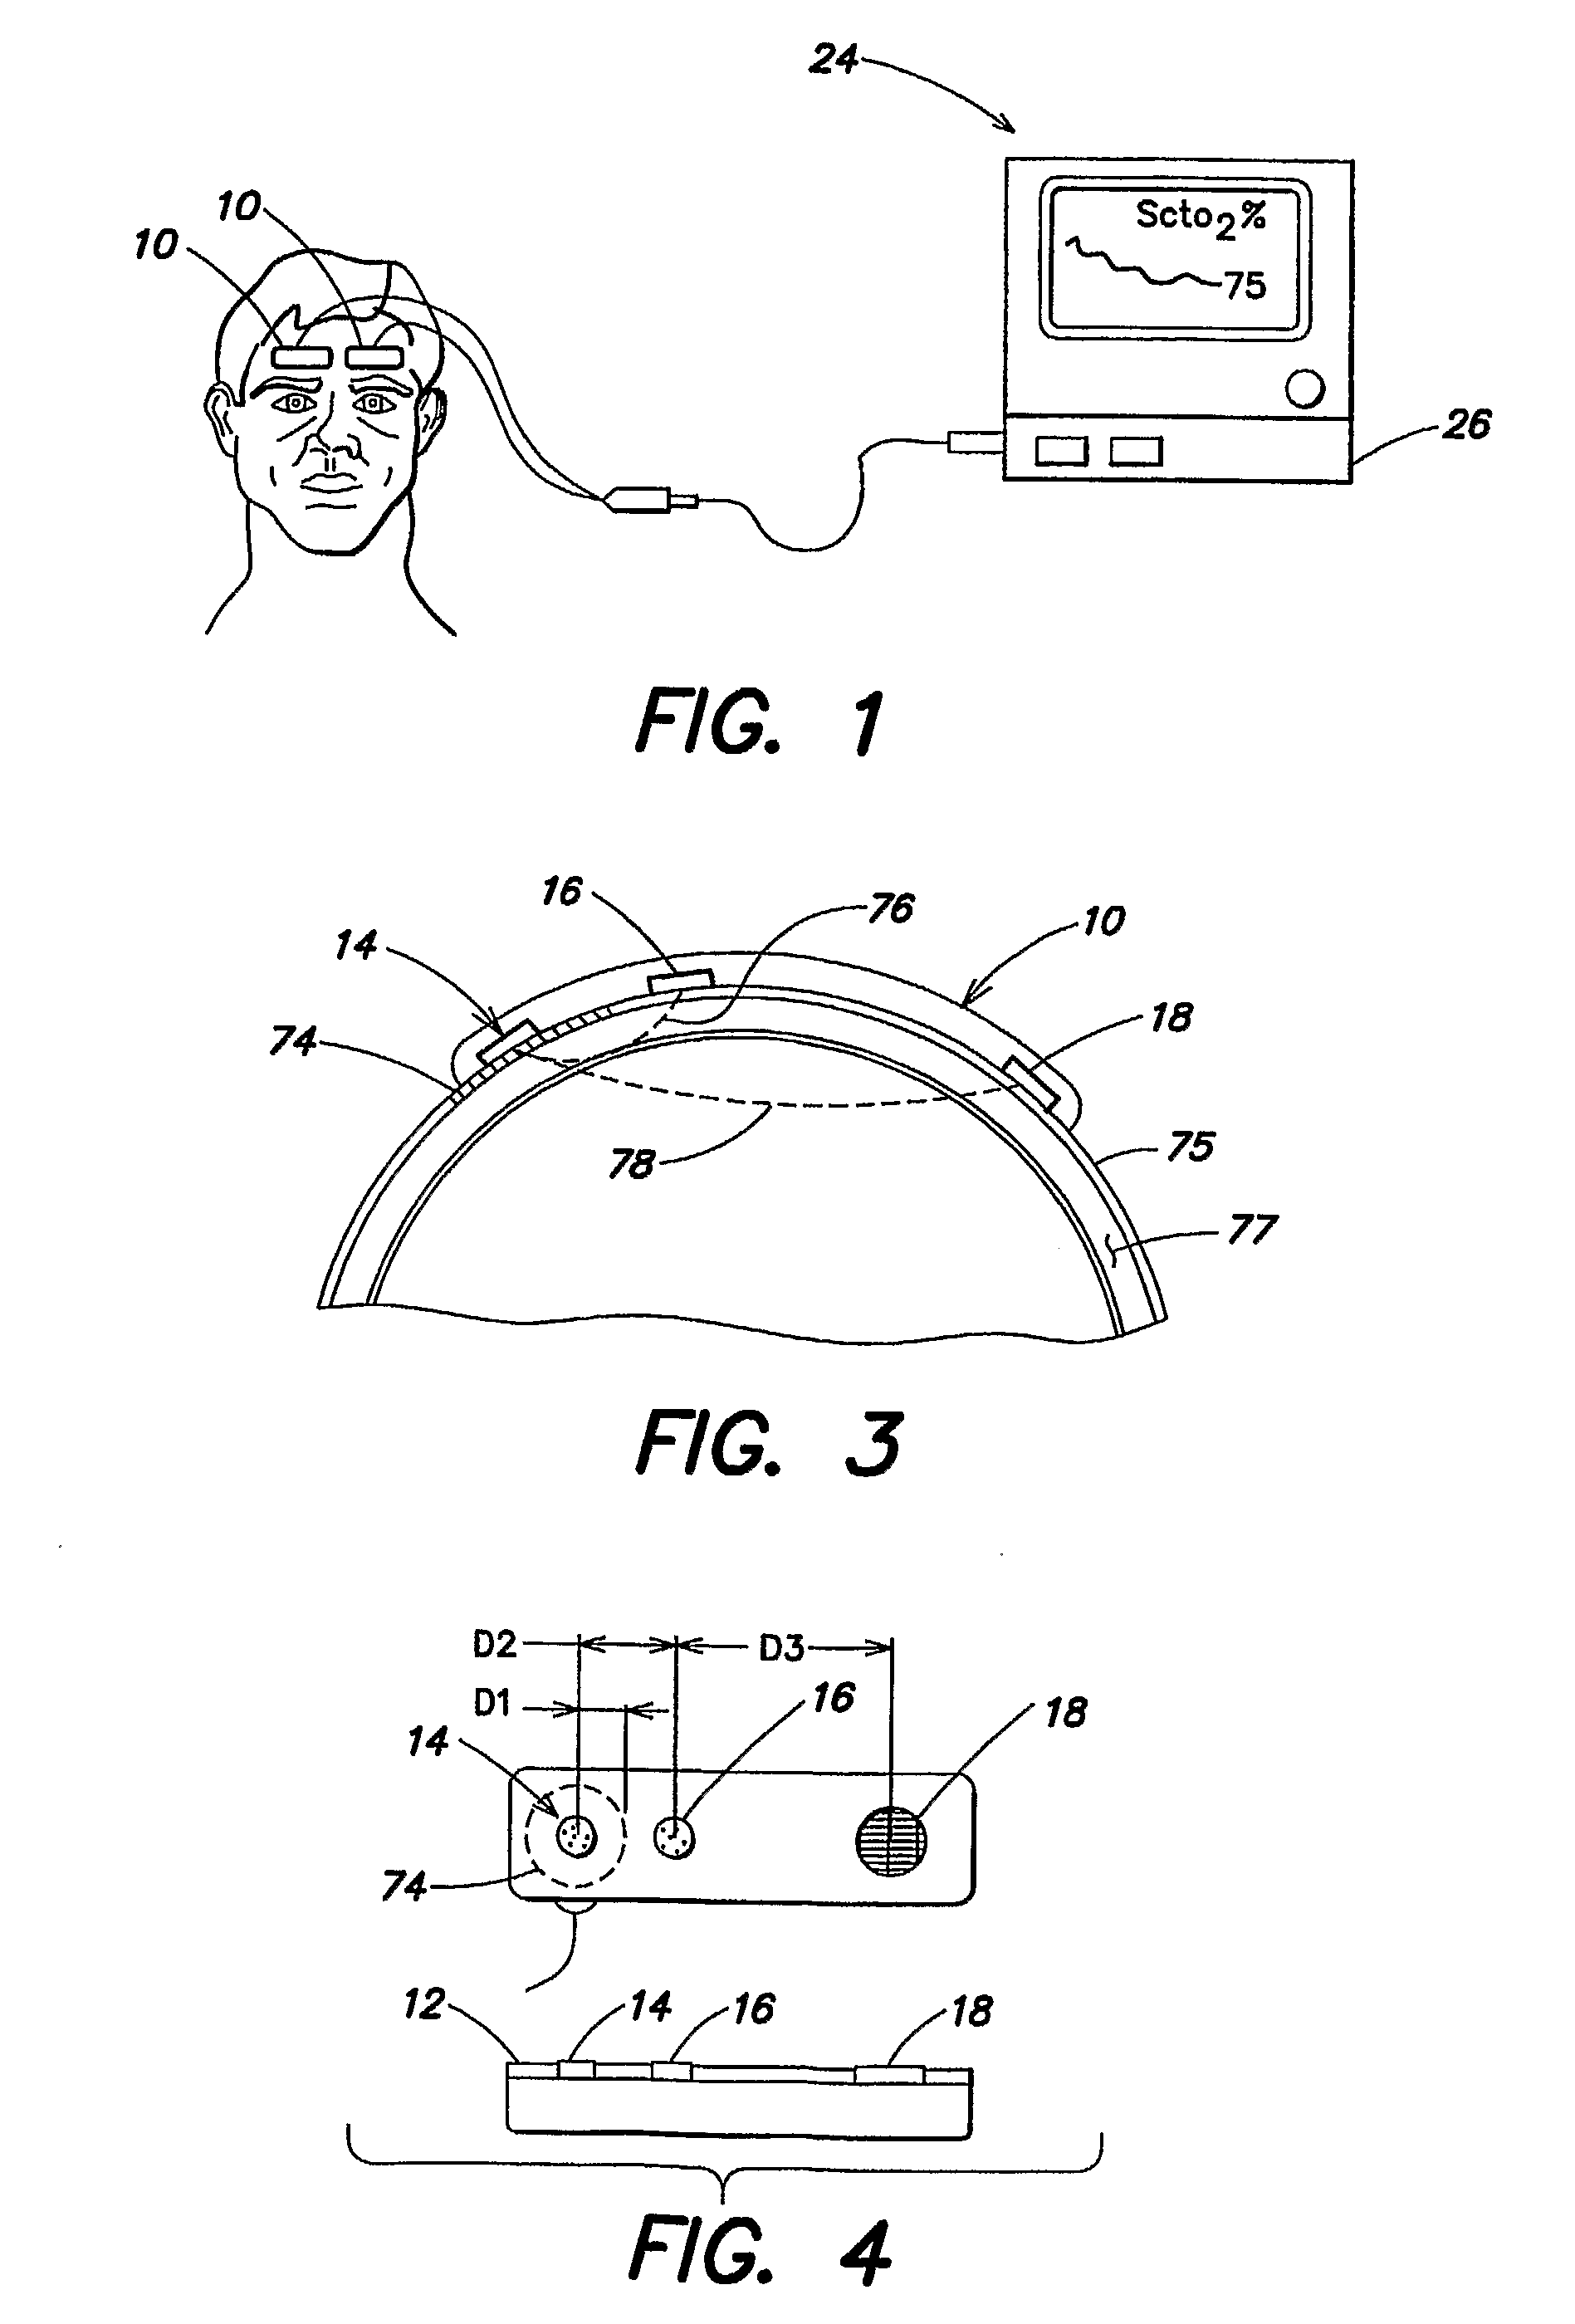 Method and apparatus for spectrophotometric based oximetry